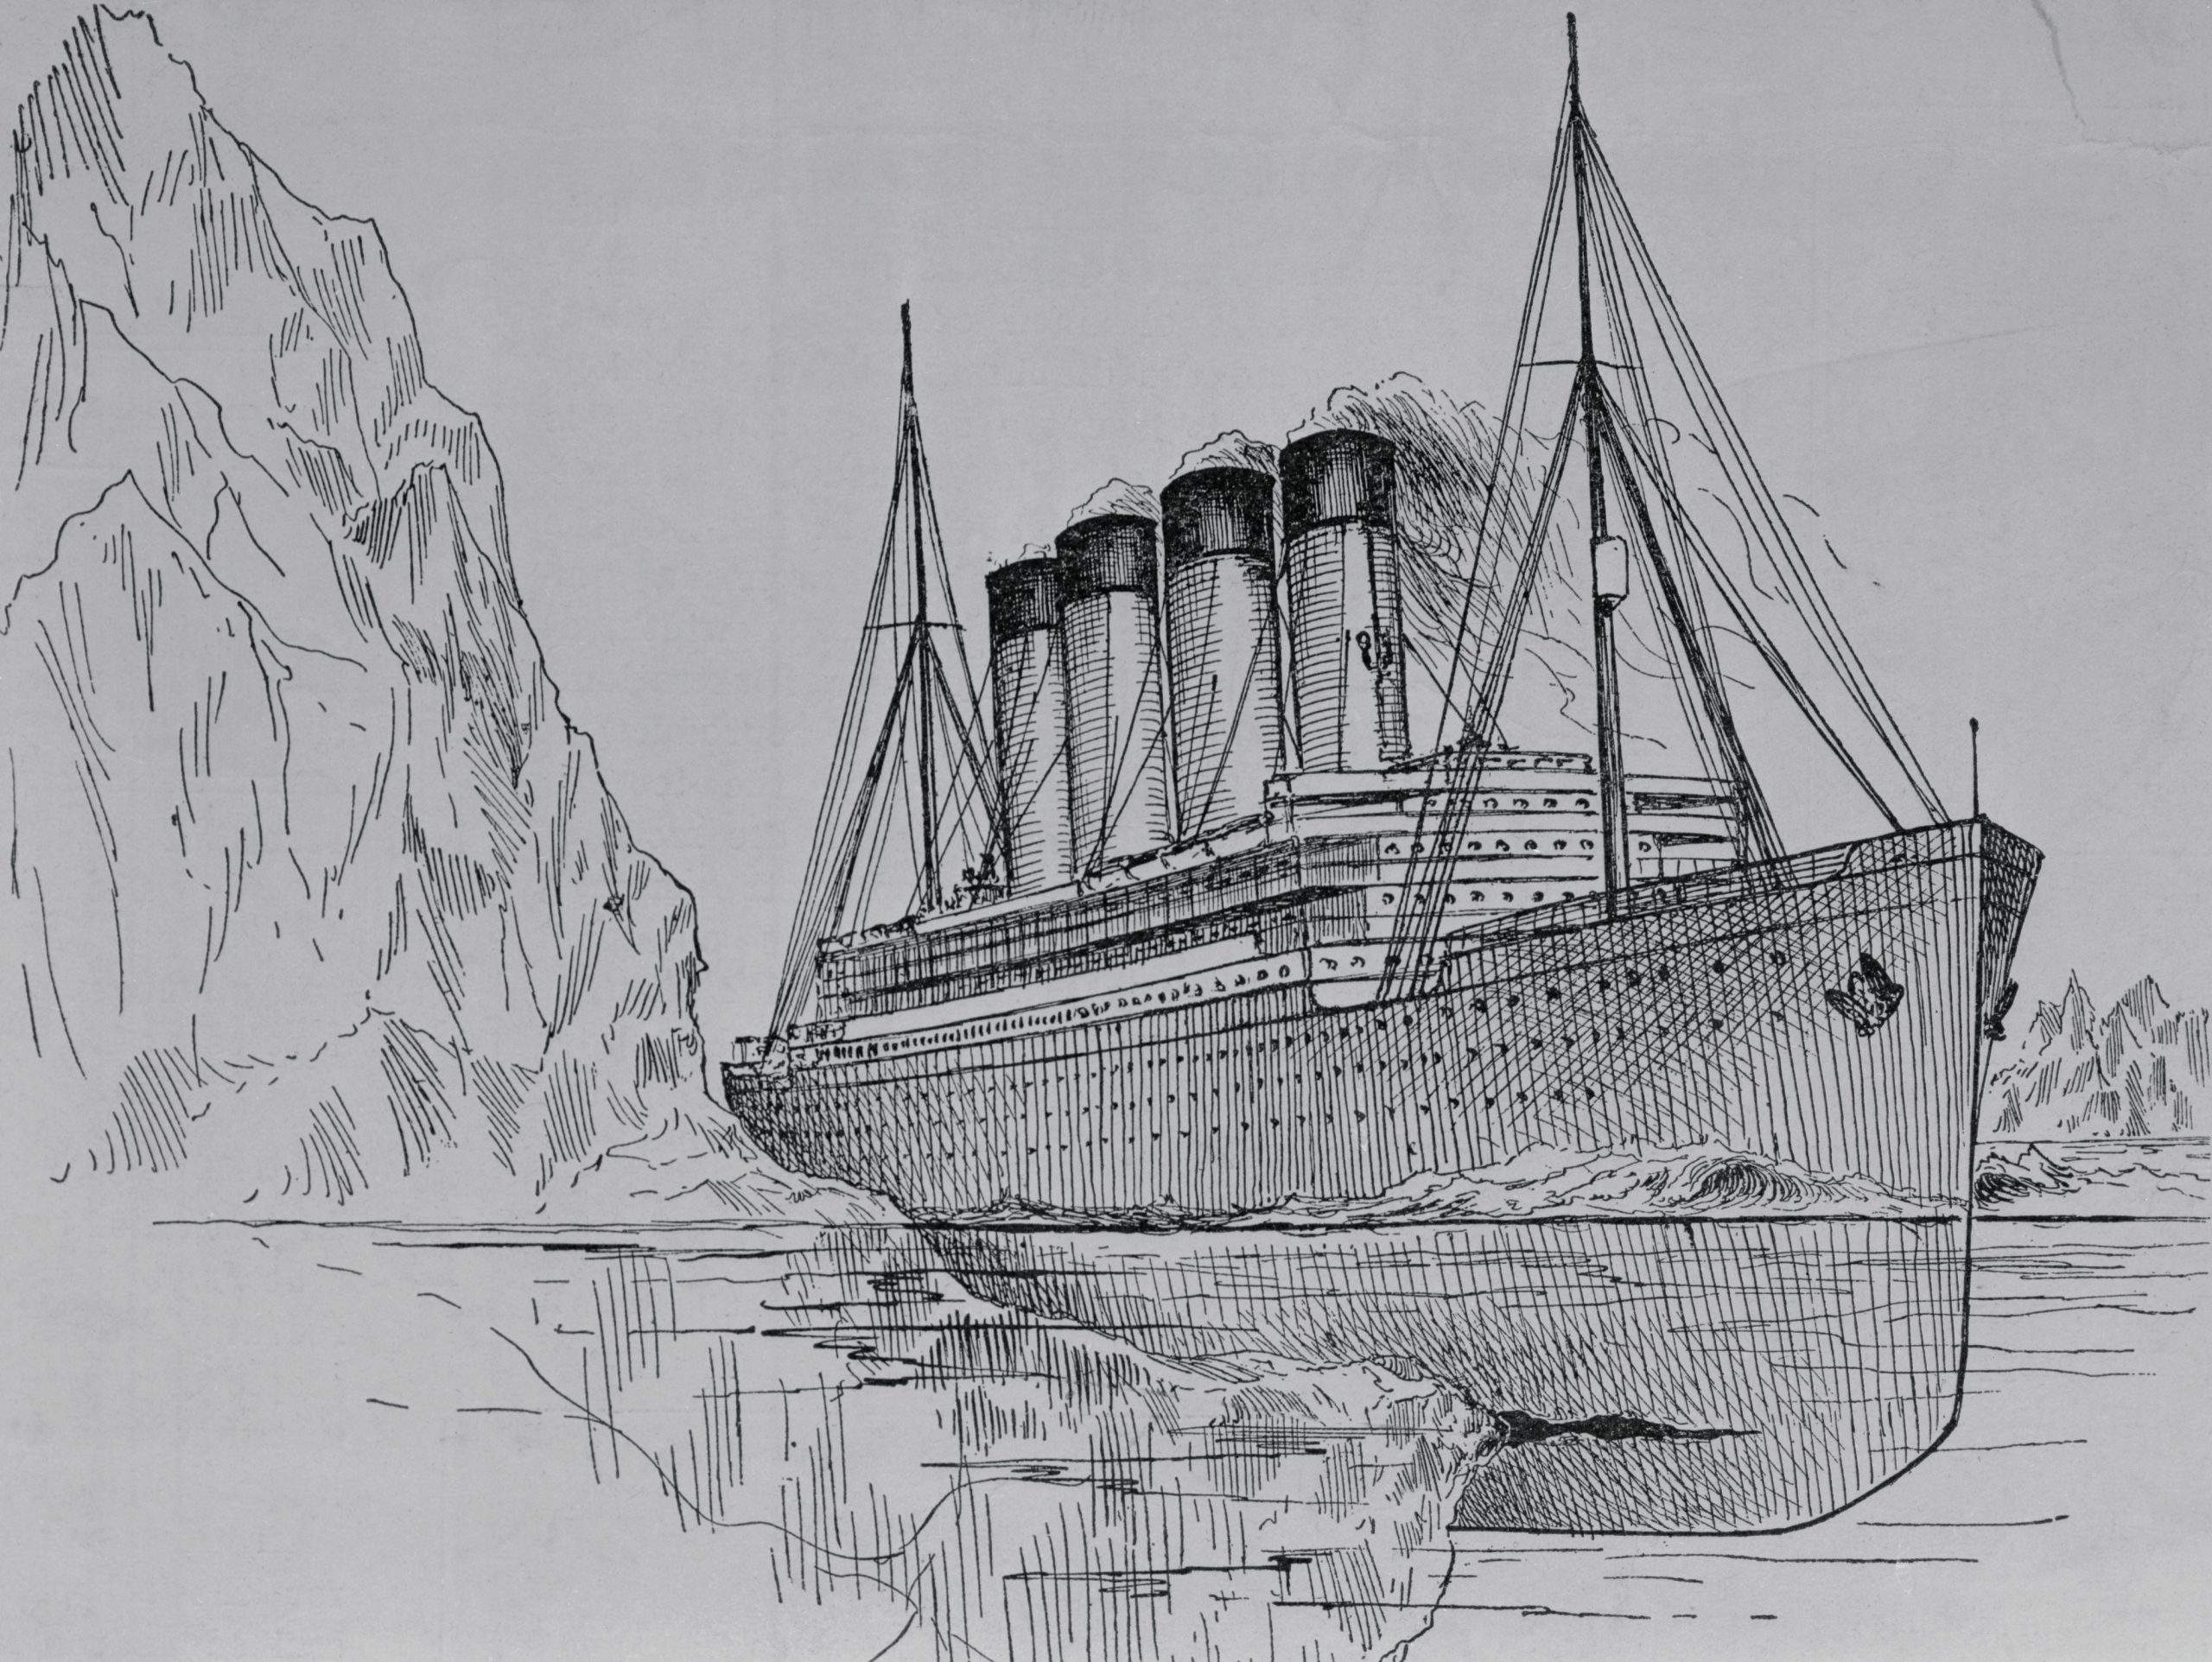 <p>You may have heard of one of the design flaws in the Titanic was that the airtight bulkheads weren't totally sealed on top, allowing water to flow from compartment to compartment and eventually sinking the ship. But according to <a href="https://blogs.scientificamerican.com/observations/titanic-the-reboot/" rel="nofollow noopener noreferrer"><em>Scientific American</em></a>, the ship was poorly designed in other ways as well. The steel of the ship's hull and the iron of its rivets fell victim to "brittle fracture" due to cold temperatures, high sulfur content, and high speeds. Because of this phenomenon, the steel basically shattered, and the rivets popped out easily—all of which sunk the ship 24 times faster than expected. Ironically, if the Titanic had hit the iceberg head-on instead of trying to avoid it and scraping it along the starboard side, the ship would have likely stayed afloat, according to the <a href="https://www.nist.gov/nist-time-capsule/nist-beneath-waves/nist-reveals-how-tiny-rivets-doomed-titanic-vessel" rel="nofollow noopener noreferrer">National Institute of Standards and Technology</a>. The ocean holds more <a href="https://www.rd.com/list/ocean-mysteries/">mysteries scientists still can't explain</a>.</p>